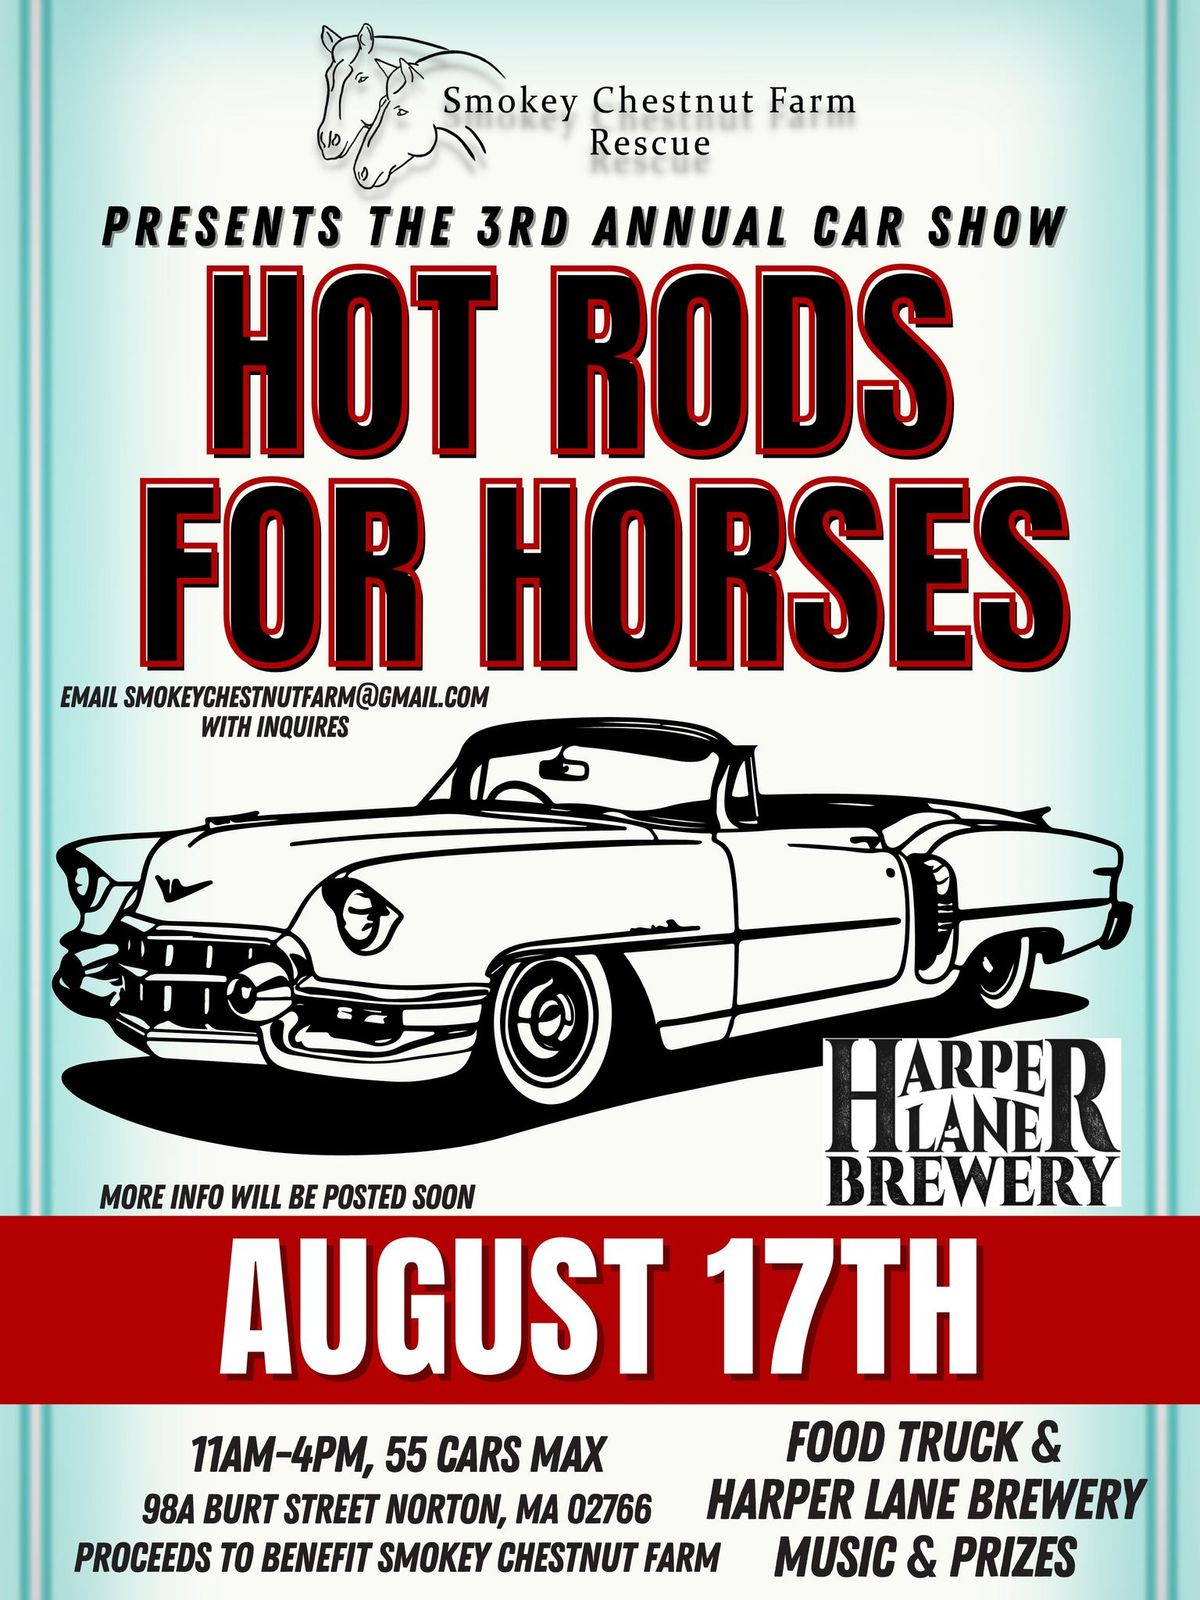 Annual Hot Rods for Horses Car Show Fundraiser